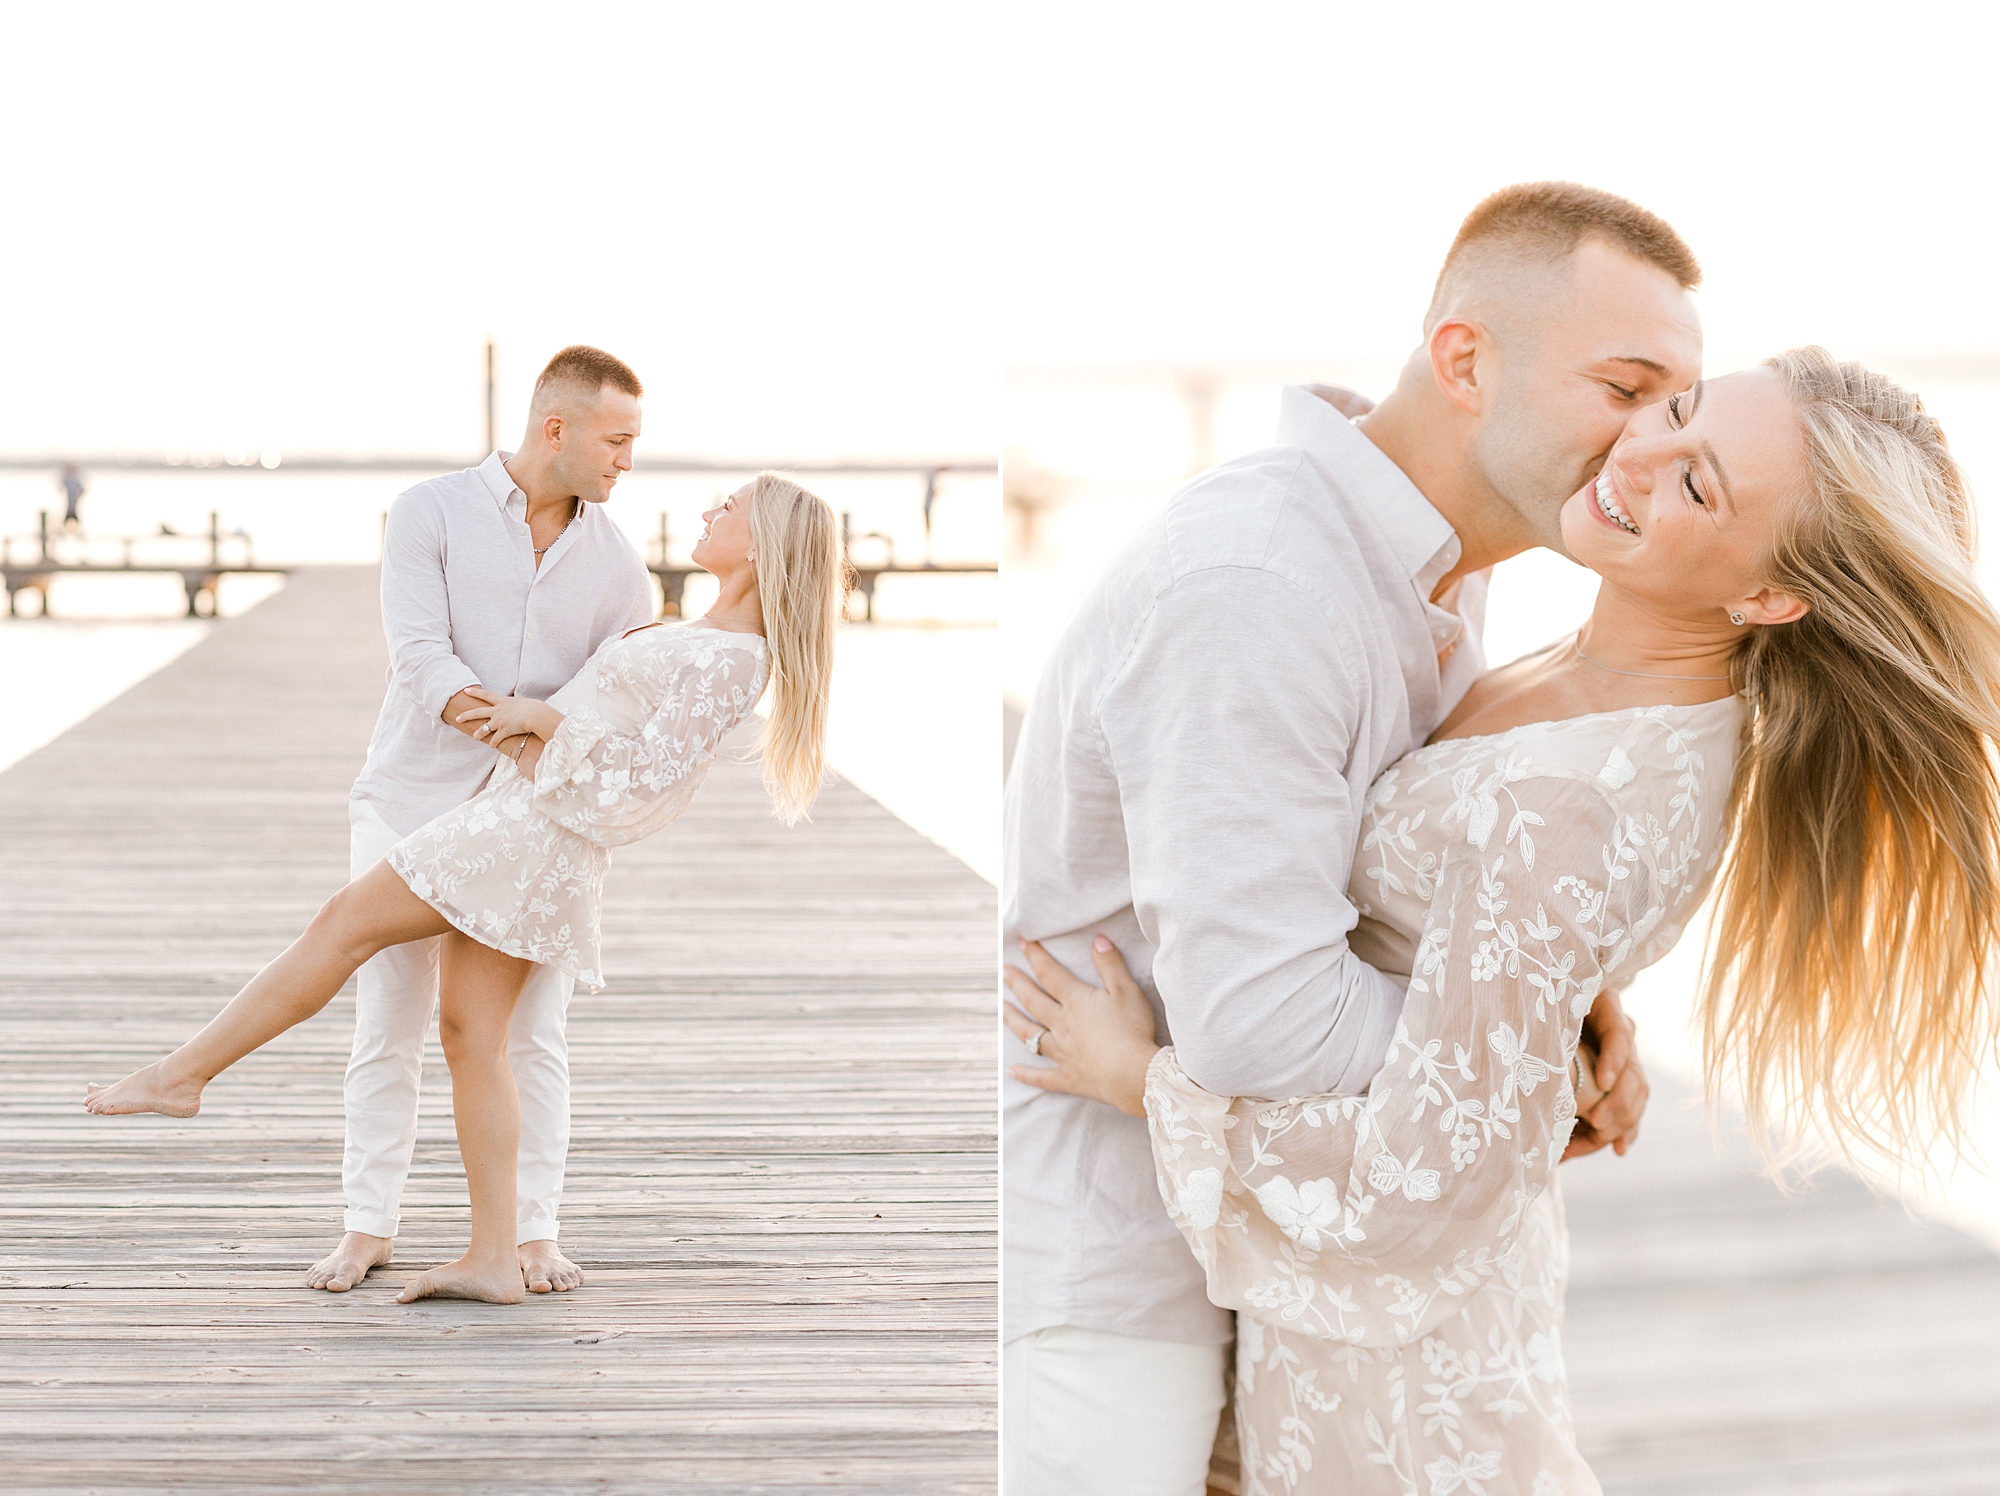 man dips bride while her hair blows in the wind walking on wooden dock